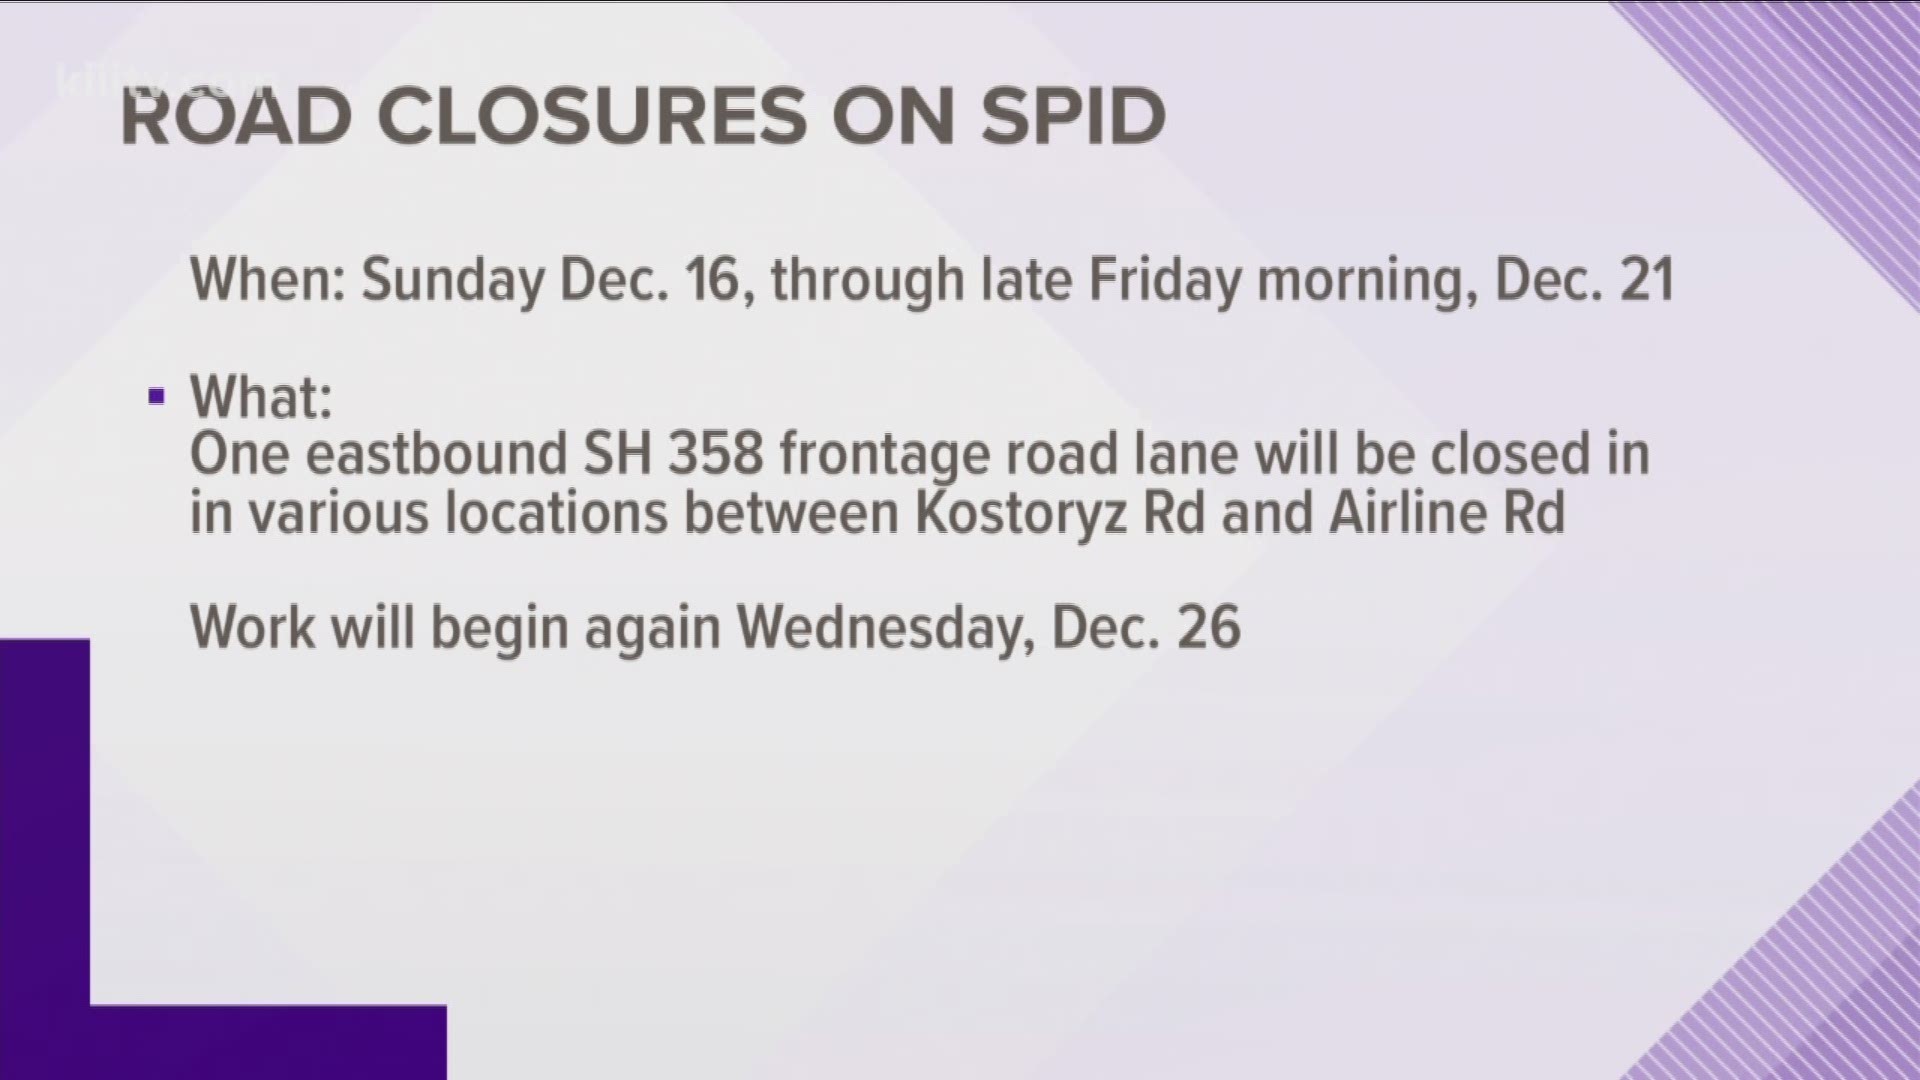 A heads up for drivers this weekend and next week -- starting at 9 p.m. Sunday, one eastbound SPID frontage road lane will be closed in various locations between Kostoryz and Airline.